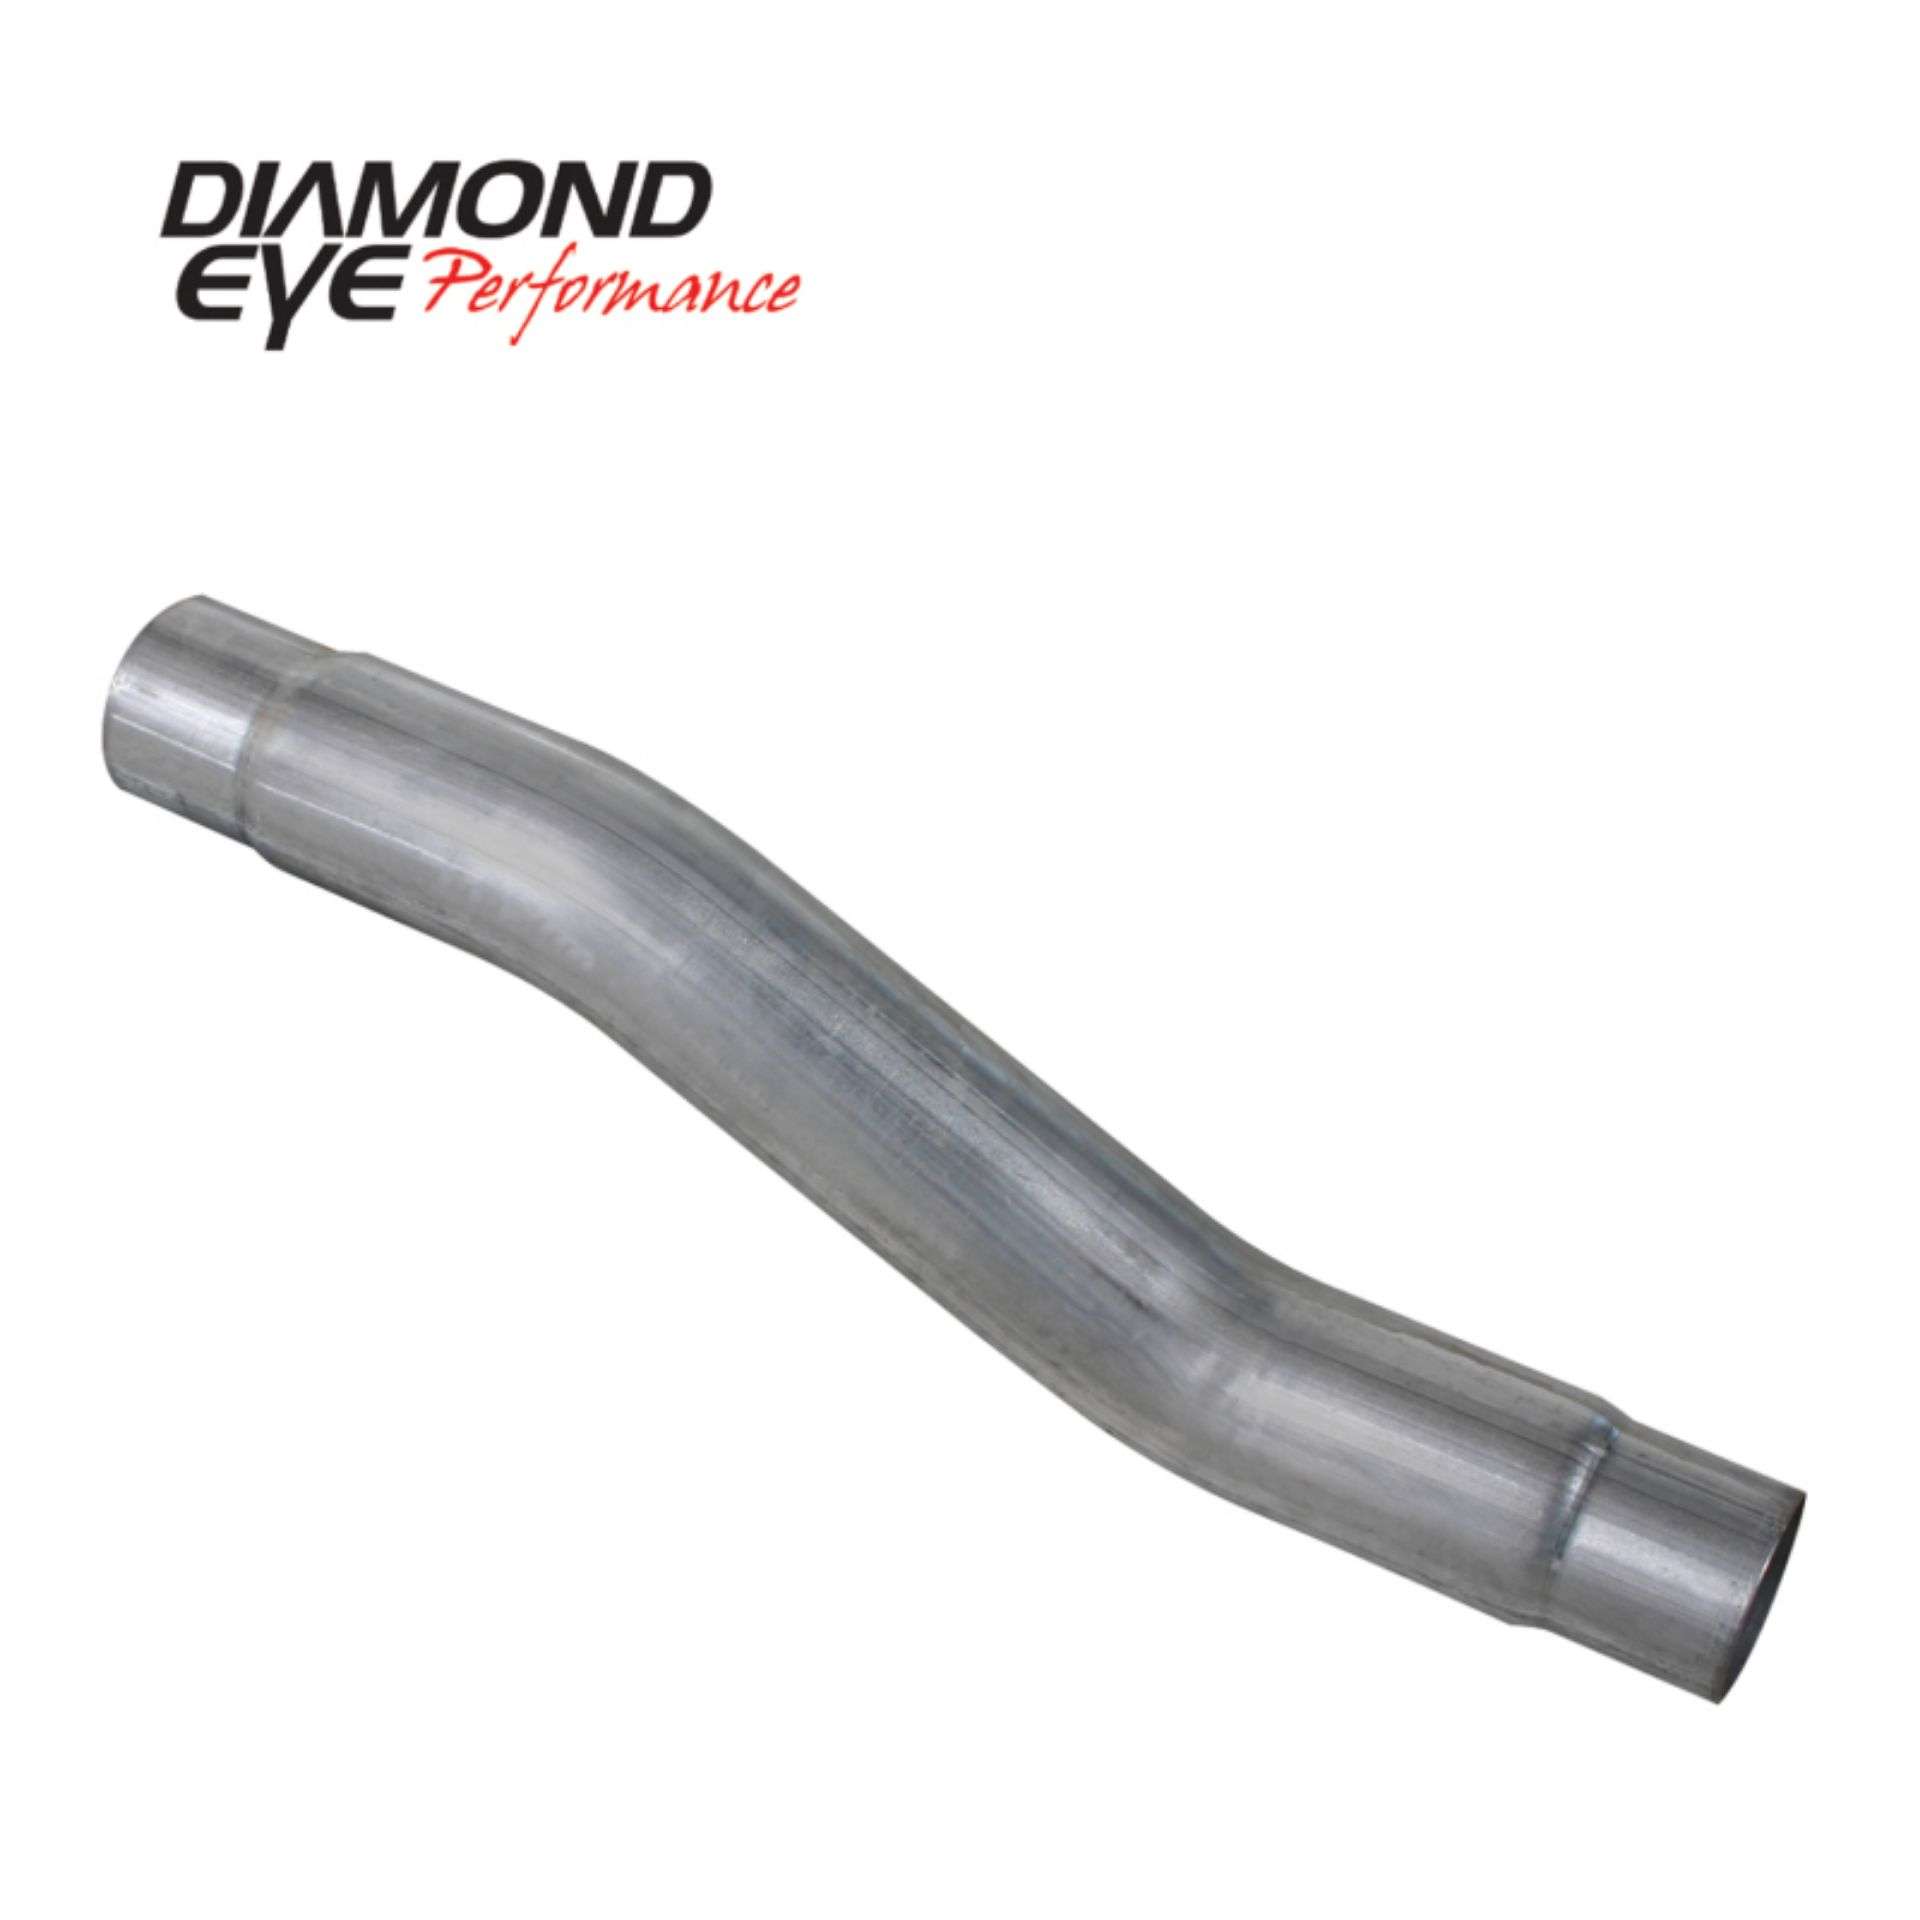 Picture of Diamond Eye MFLR RPLCMENT PIPE 3-1-2inX30in FINISHED OVERALL LENGTH NFS W- CARB EQUIV STDS PHIS26